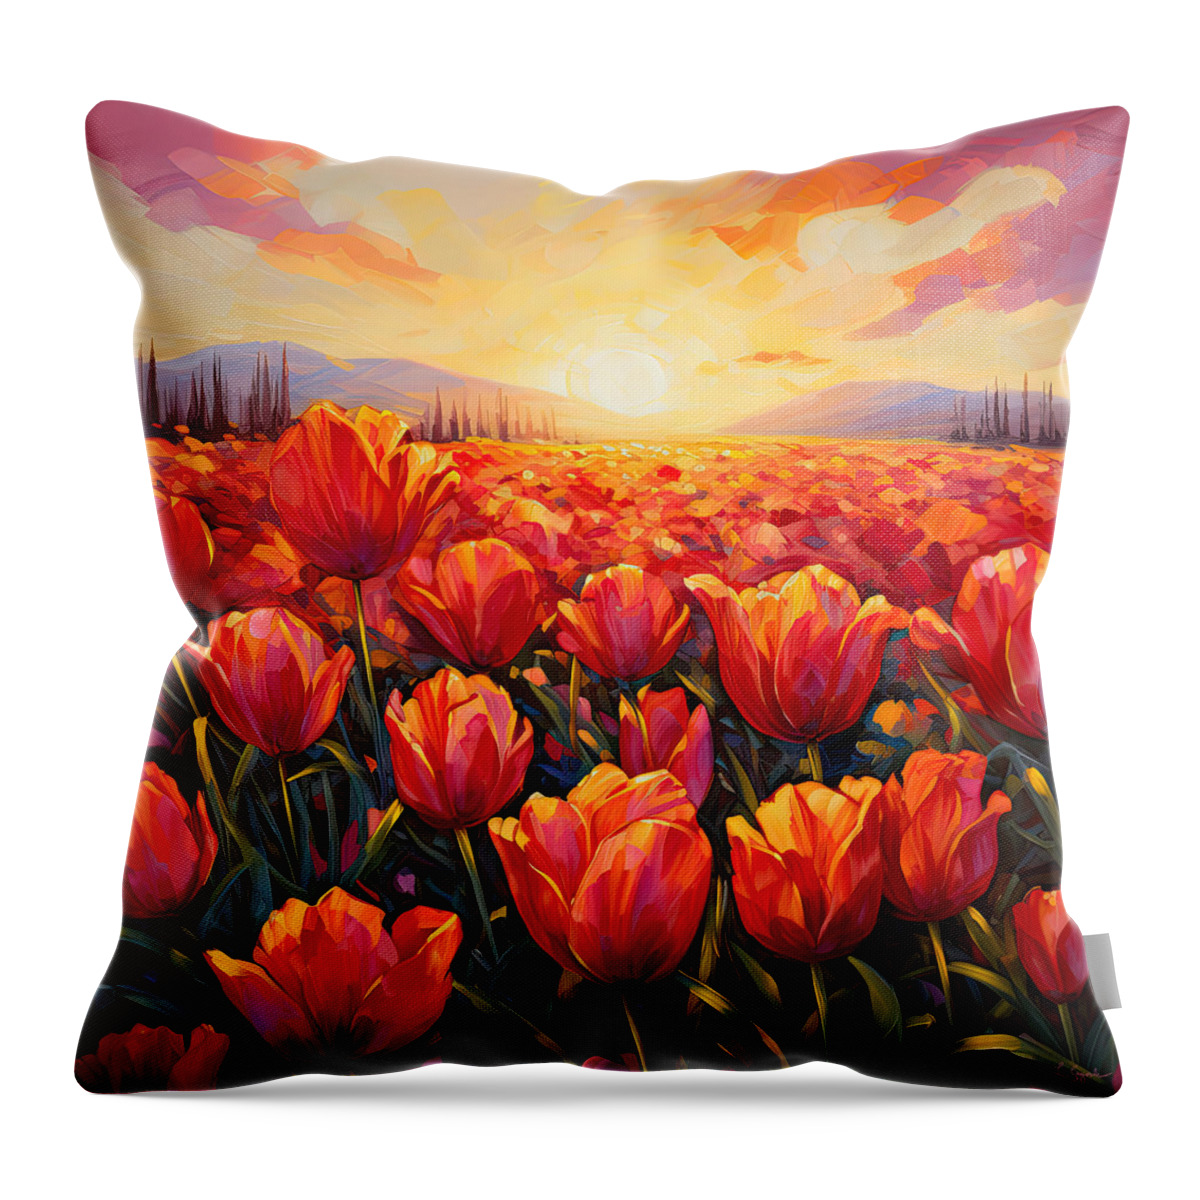 Poppies Throw Pillow featuring the painting Evening Sun - Glowing Tuscan Field Paintings by Lourry Legarde